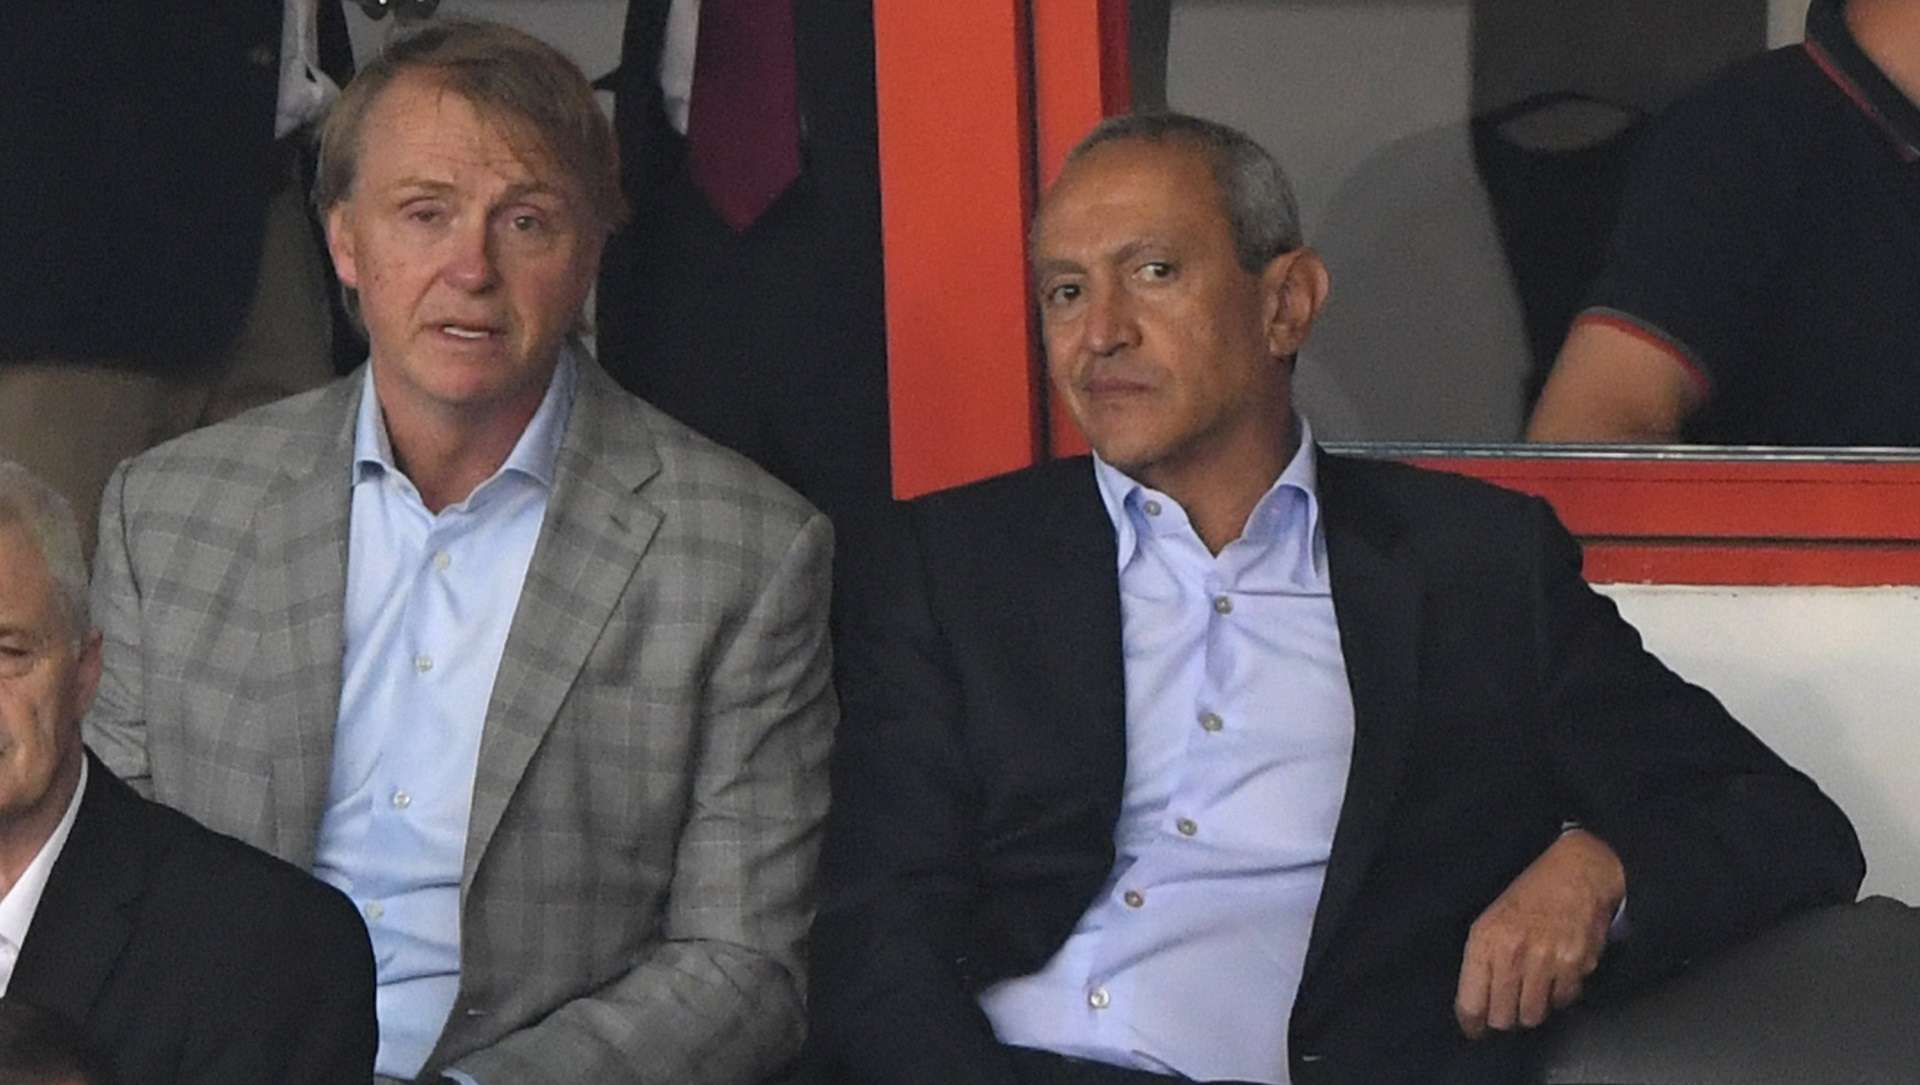 Aston Villa owners Nassef Sawiris (r) and Wes Edens, Friendly  Aston Villa and West Ham United at Banks' Stadium on July 25, 2018